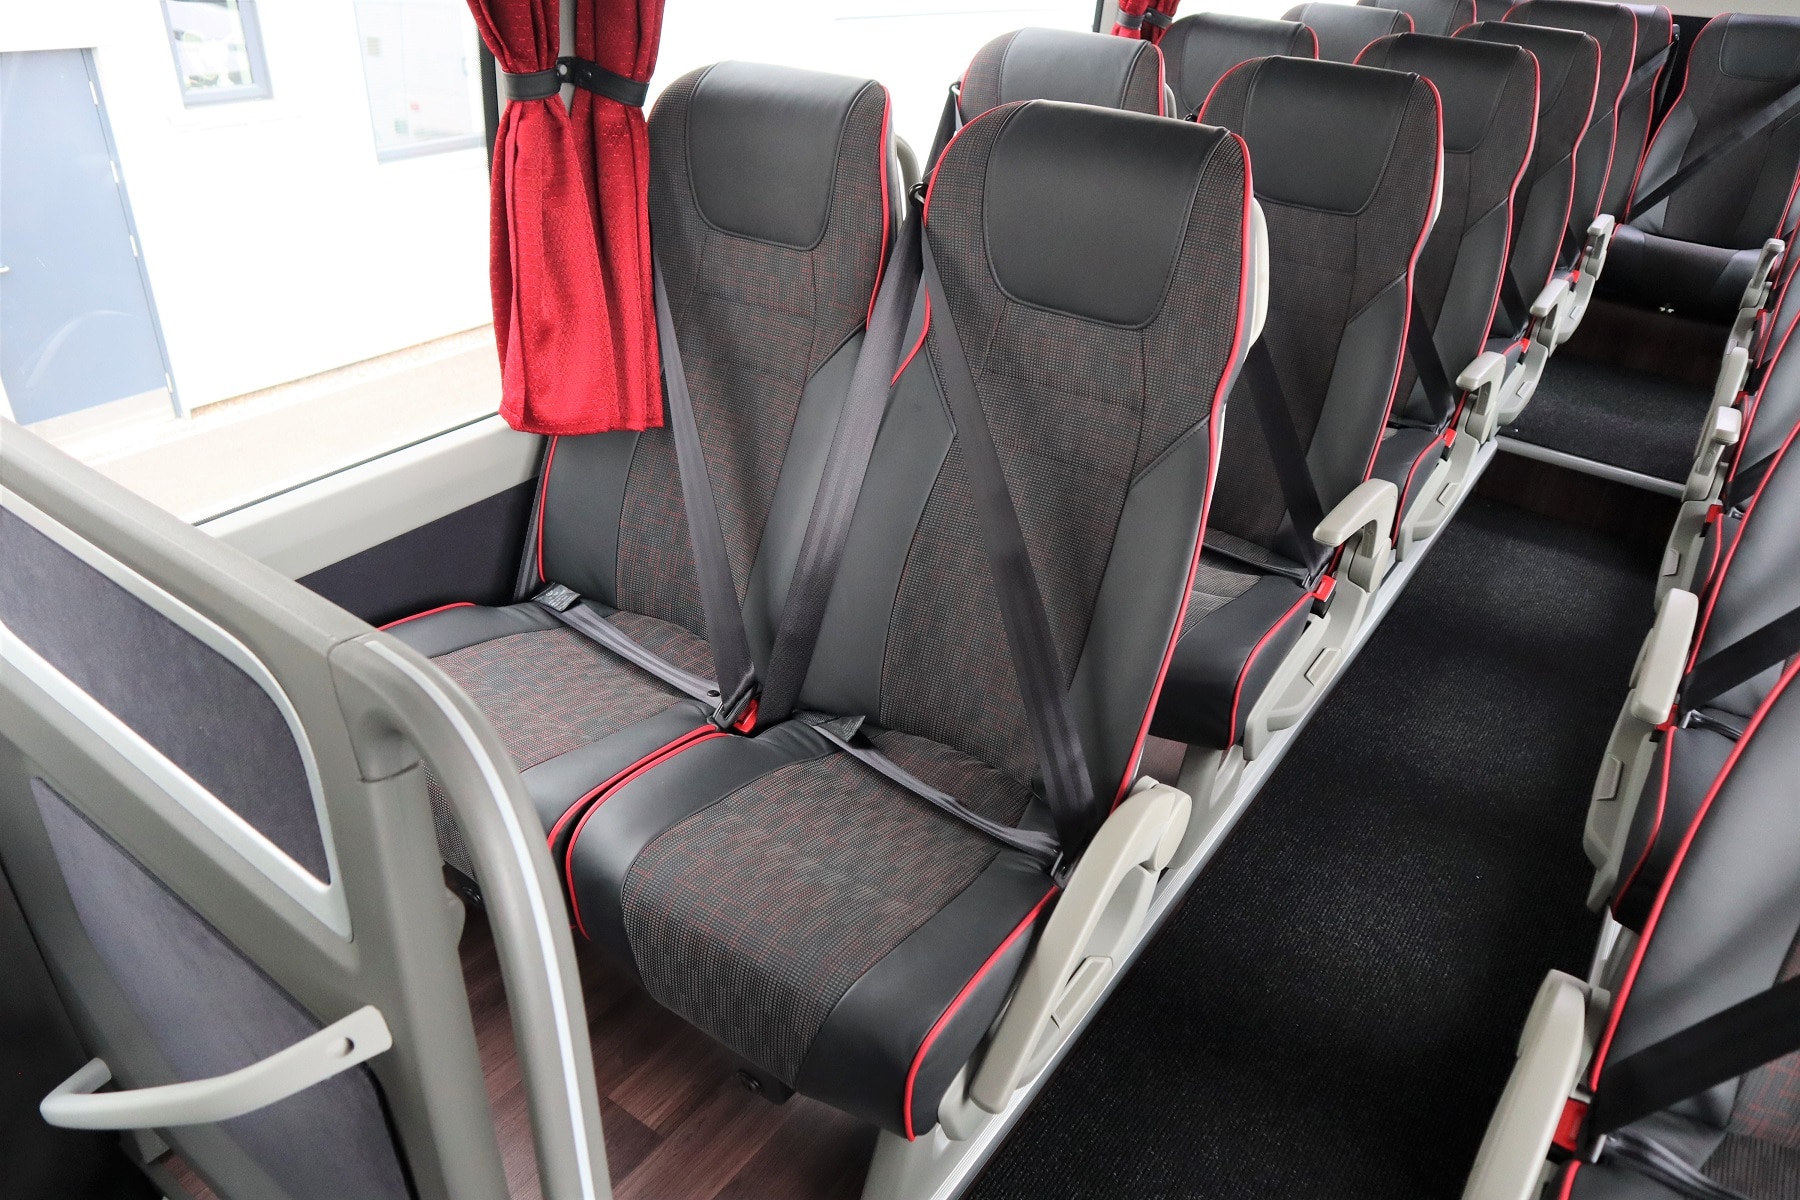 Volvo seat in 9700 two axle coach